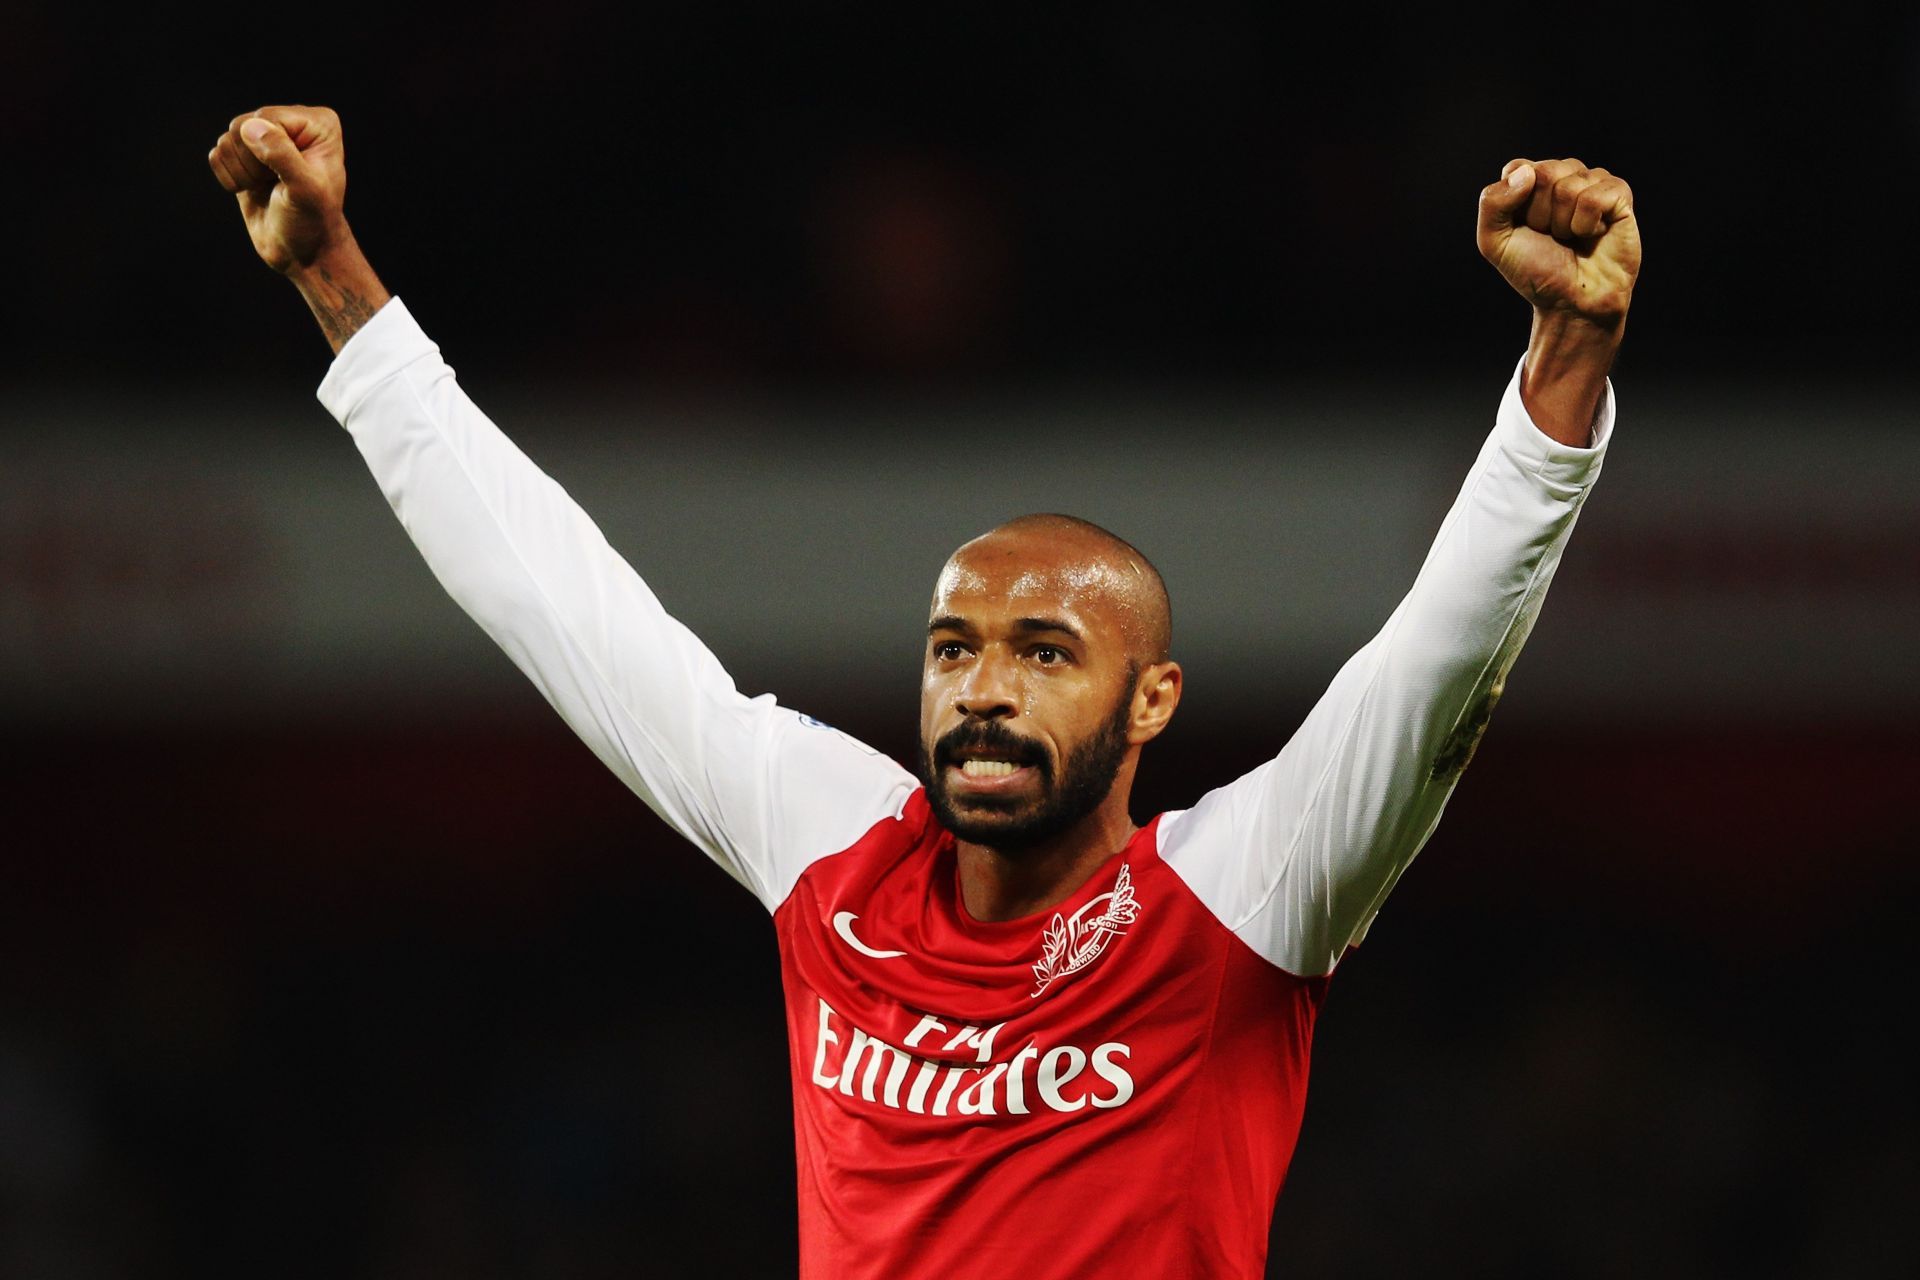 Thierry Henry is an Arsenal legend.